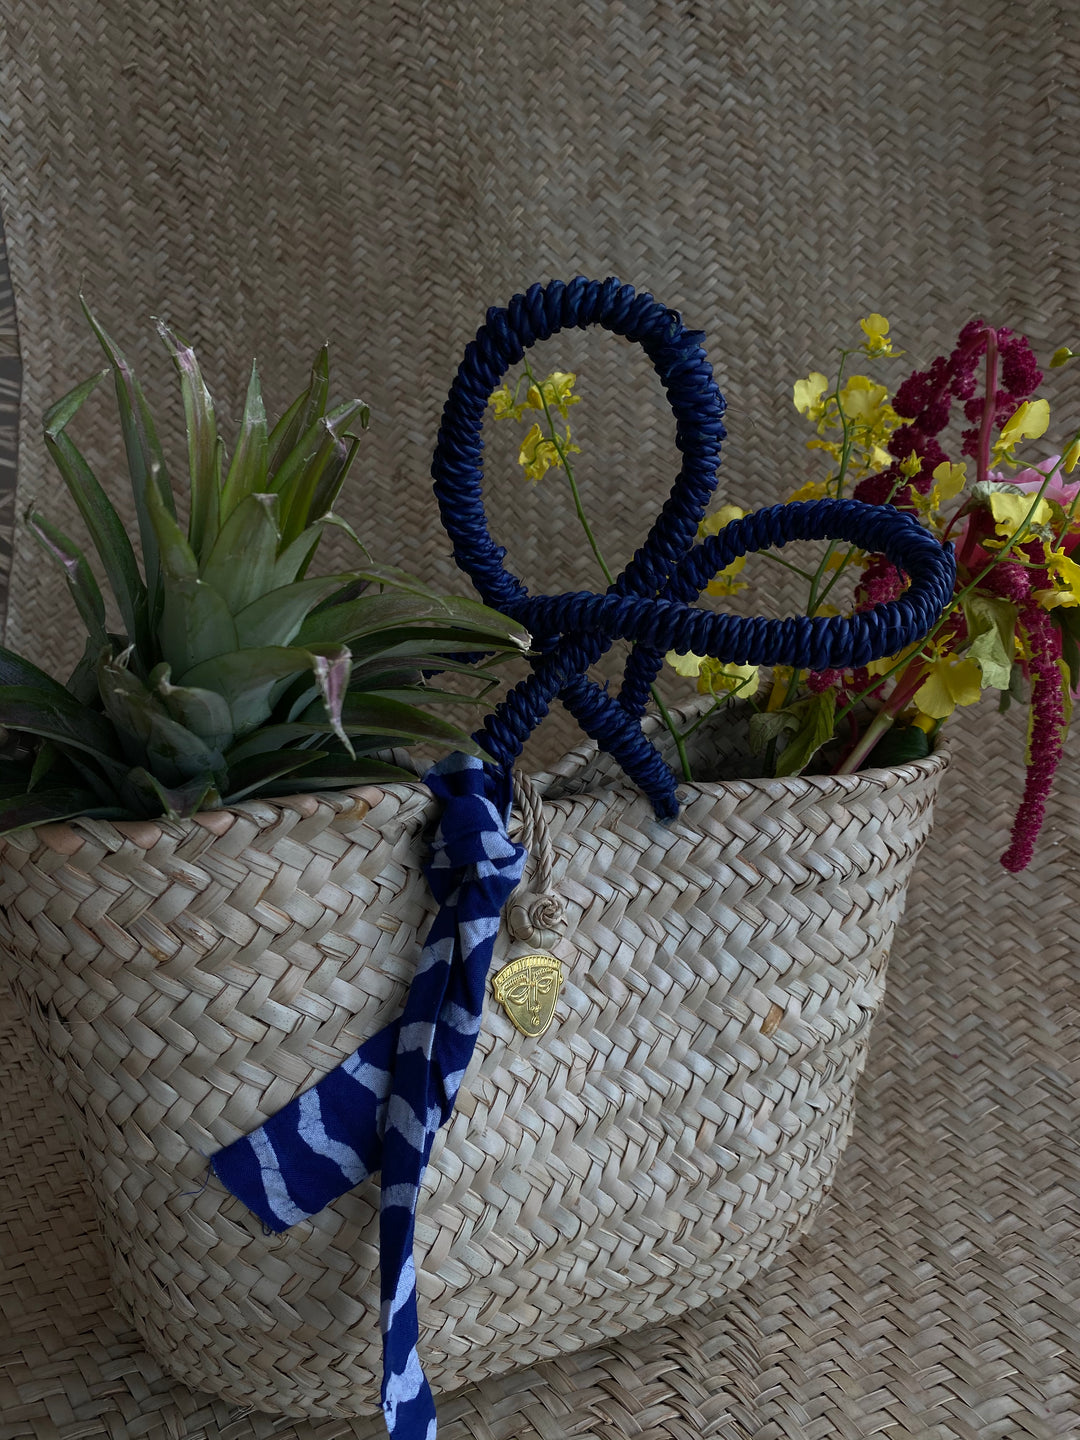 5 creative ways to use our colorful woven baskets